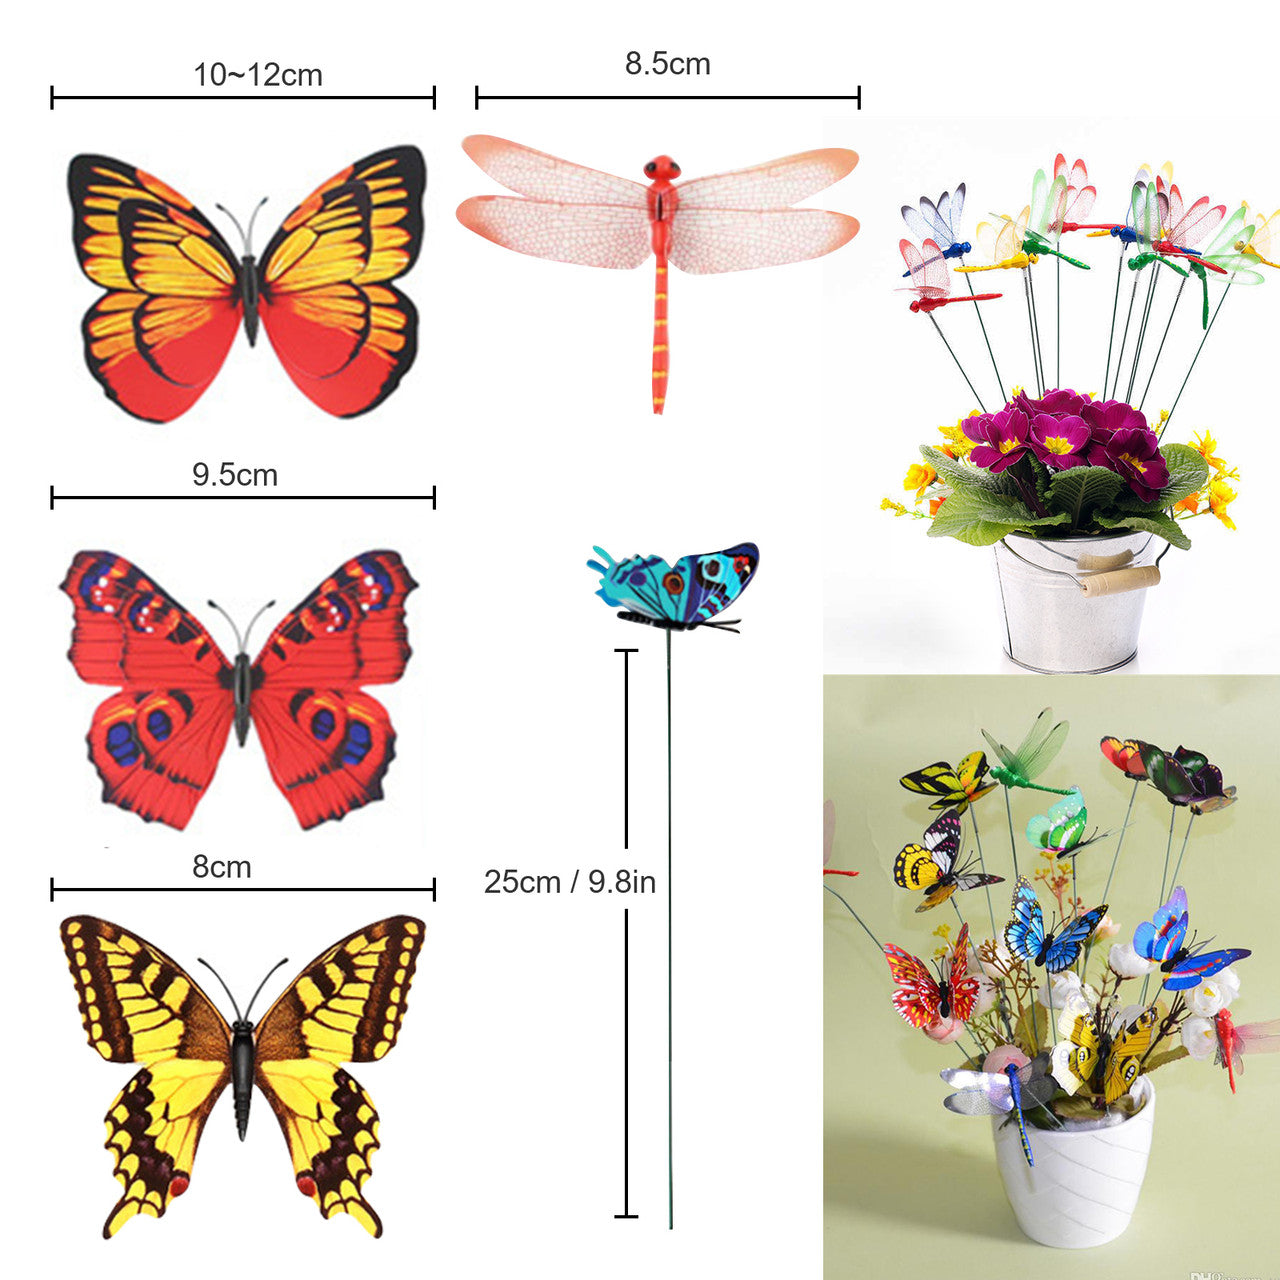 Assorted Butterfly Stakes Outdoor Garden Ornaments Yard Patio Flower Planter, 50pcs